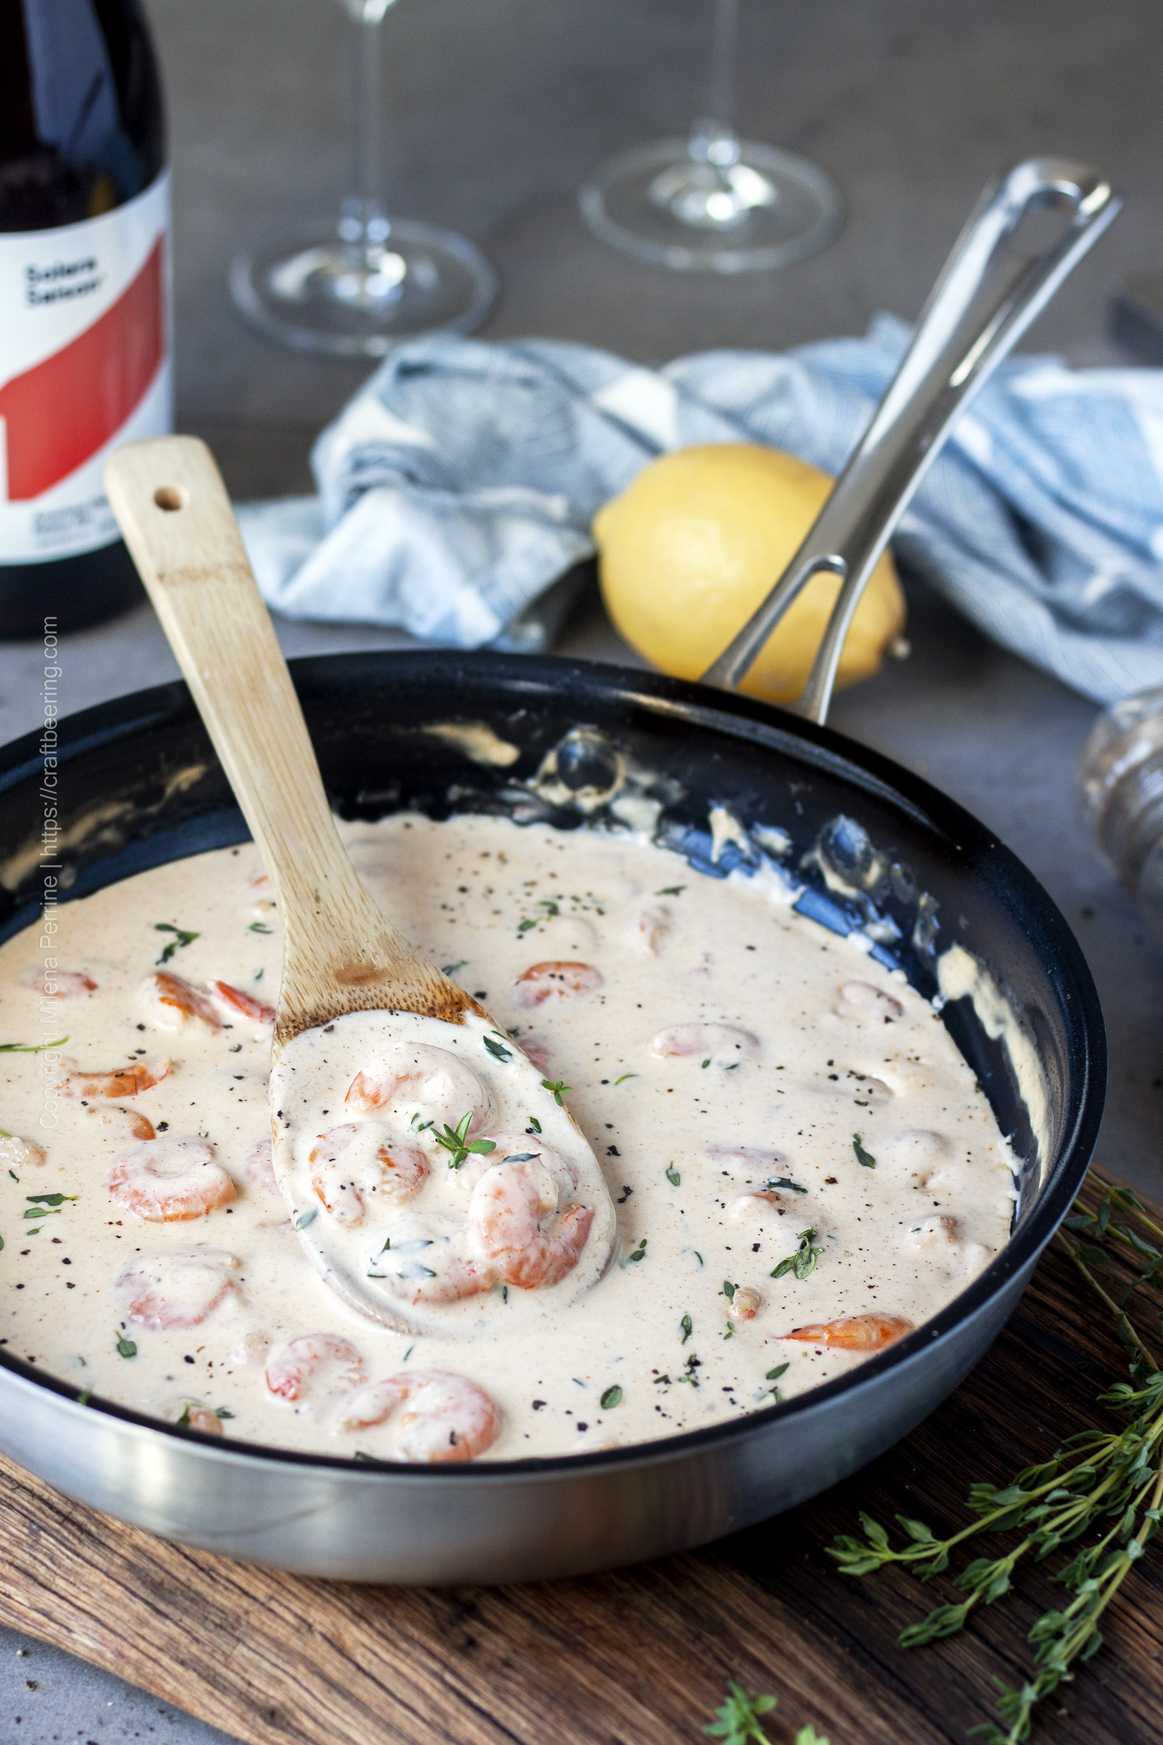 Shrimp cream sauce - just made and ready to serve over pasta, salmon, lobster ravioli and so much more!